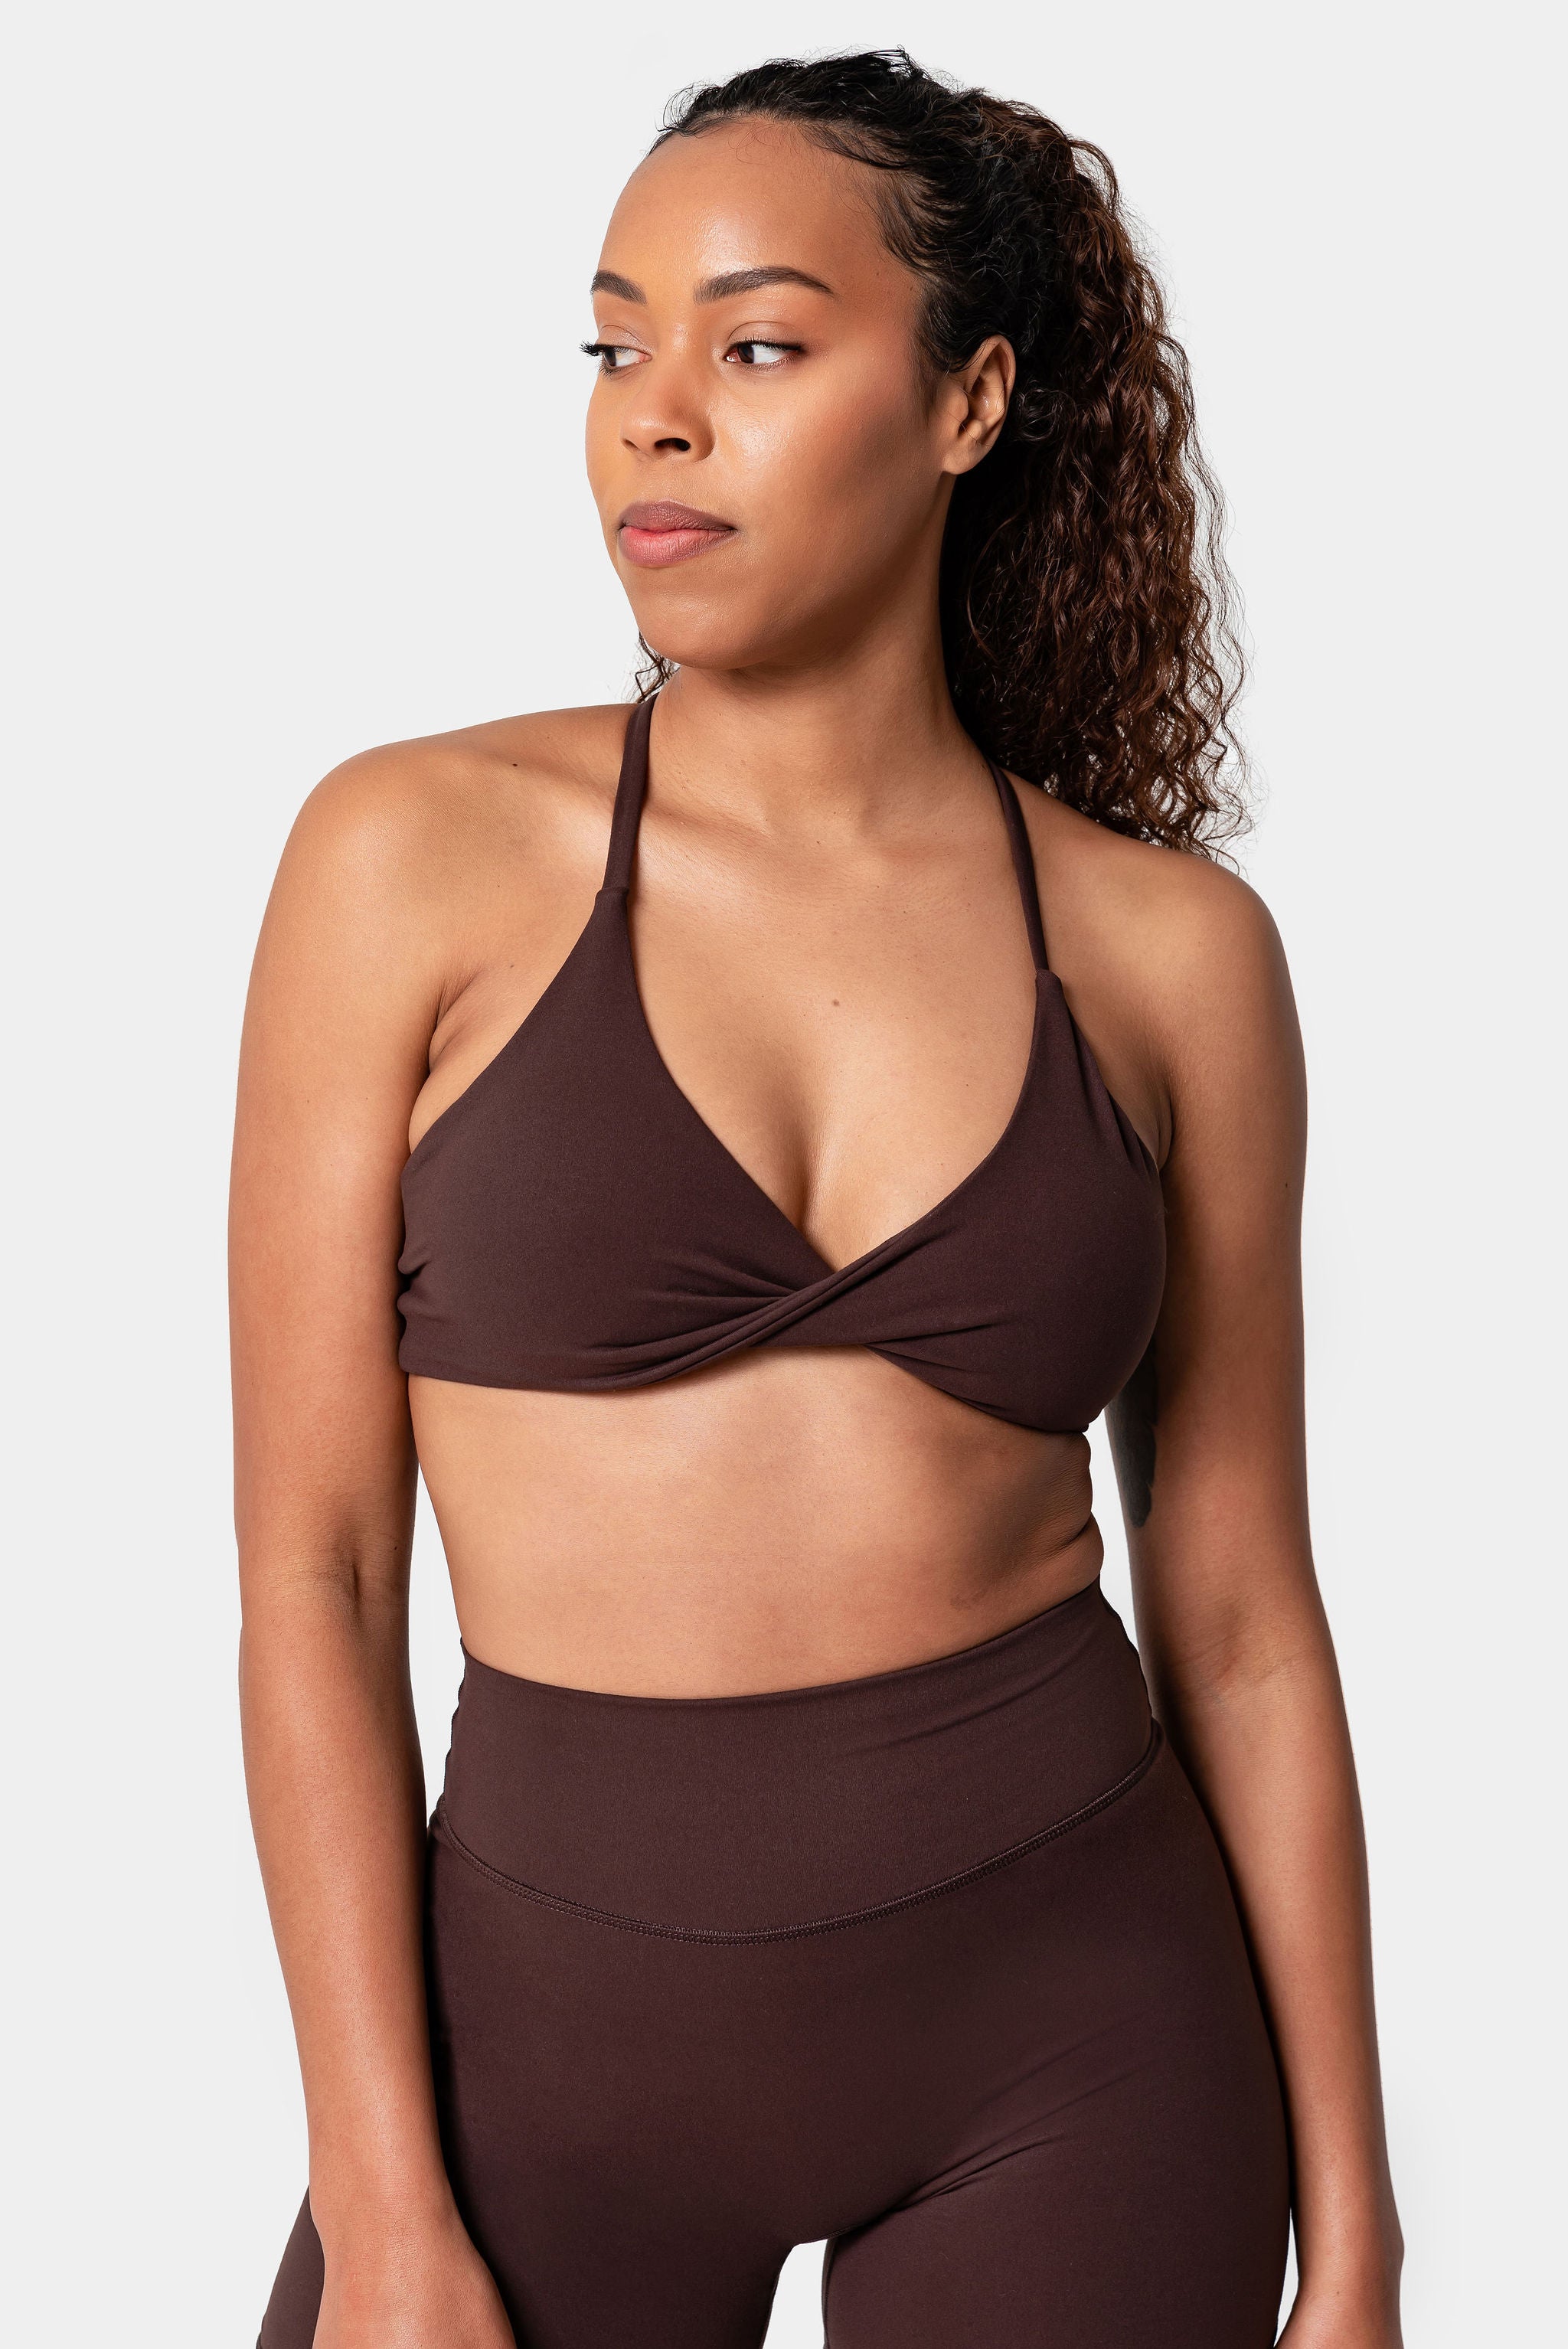 The Iris Crop Sports Bra was created with a single purpose in mind